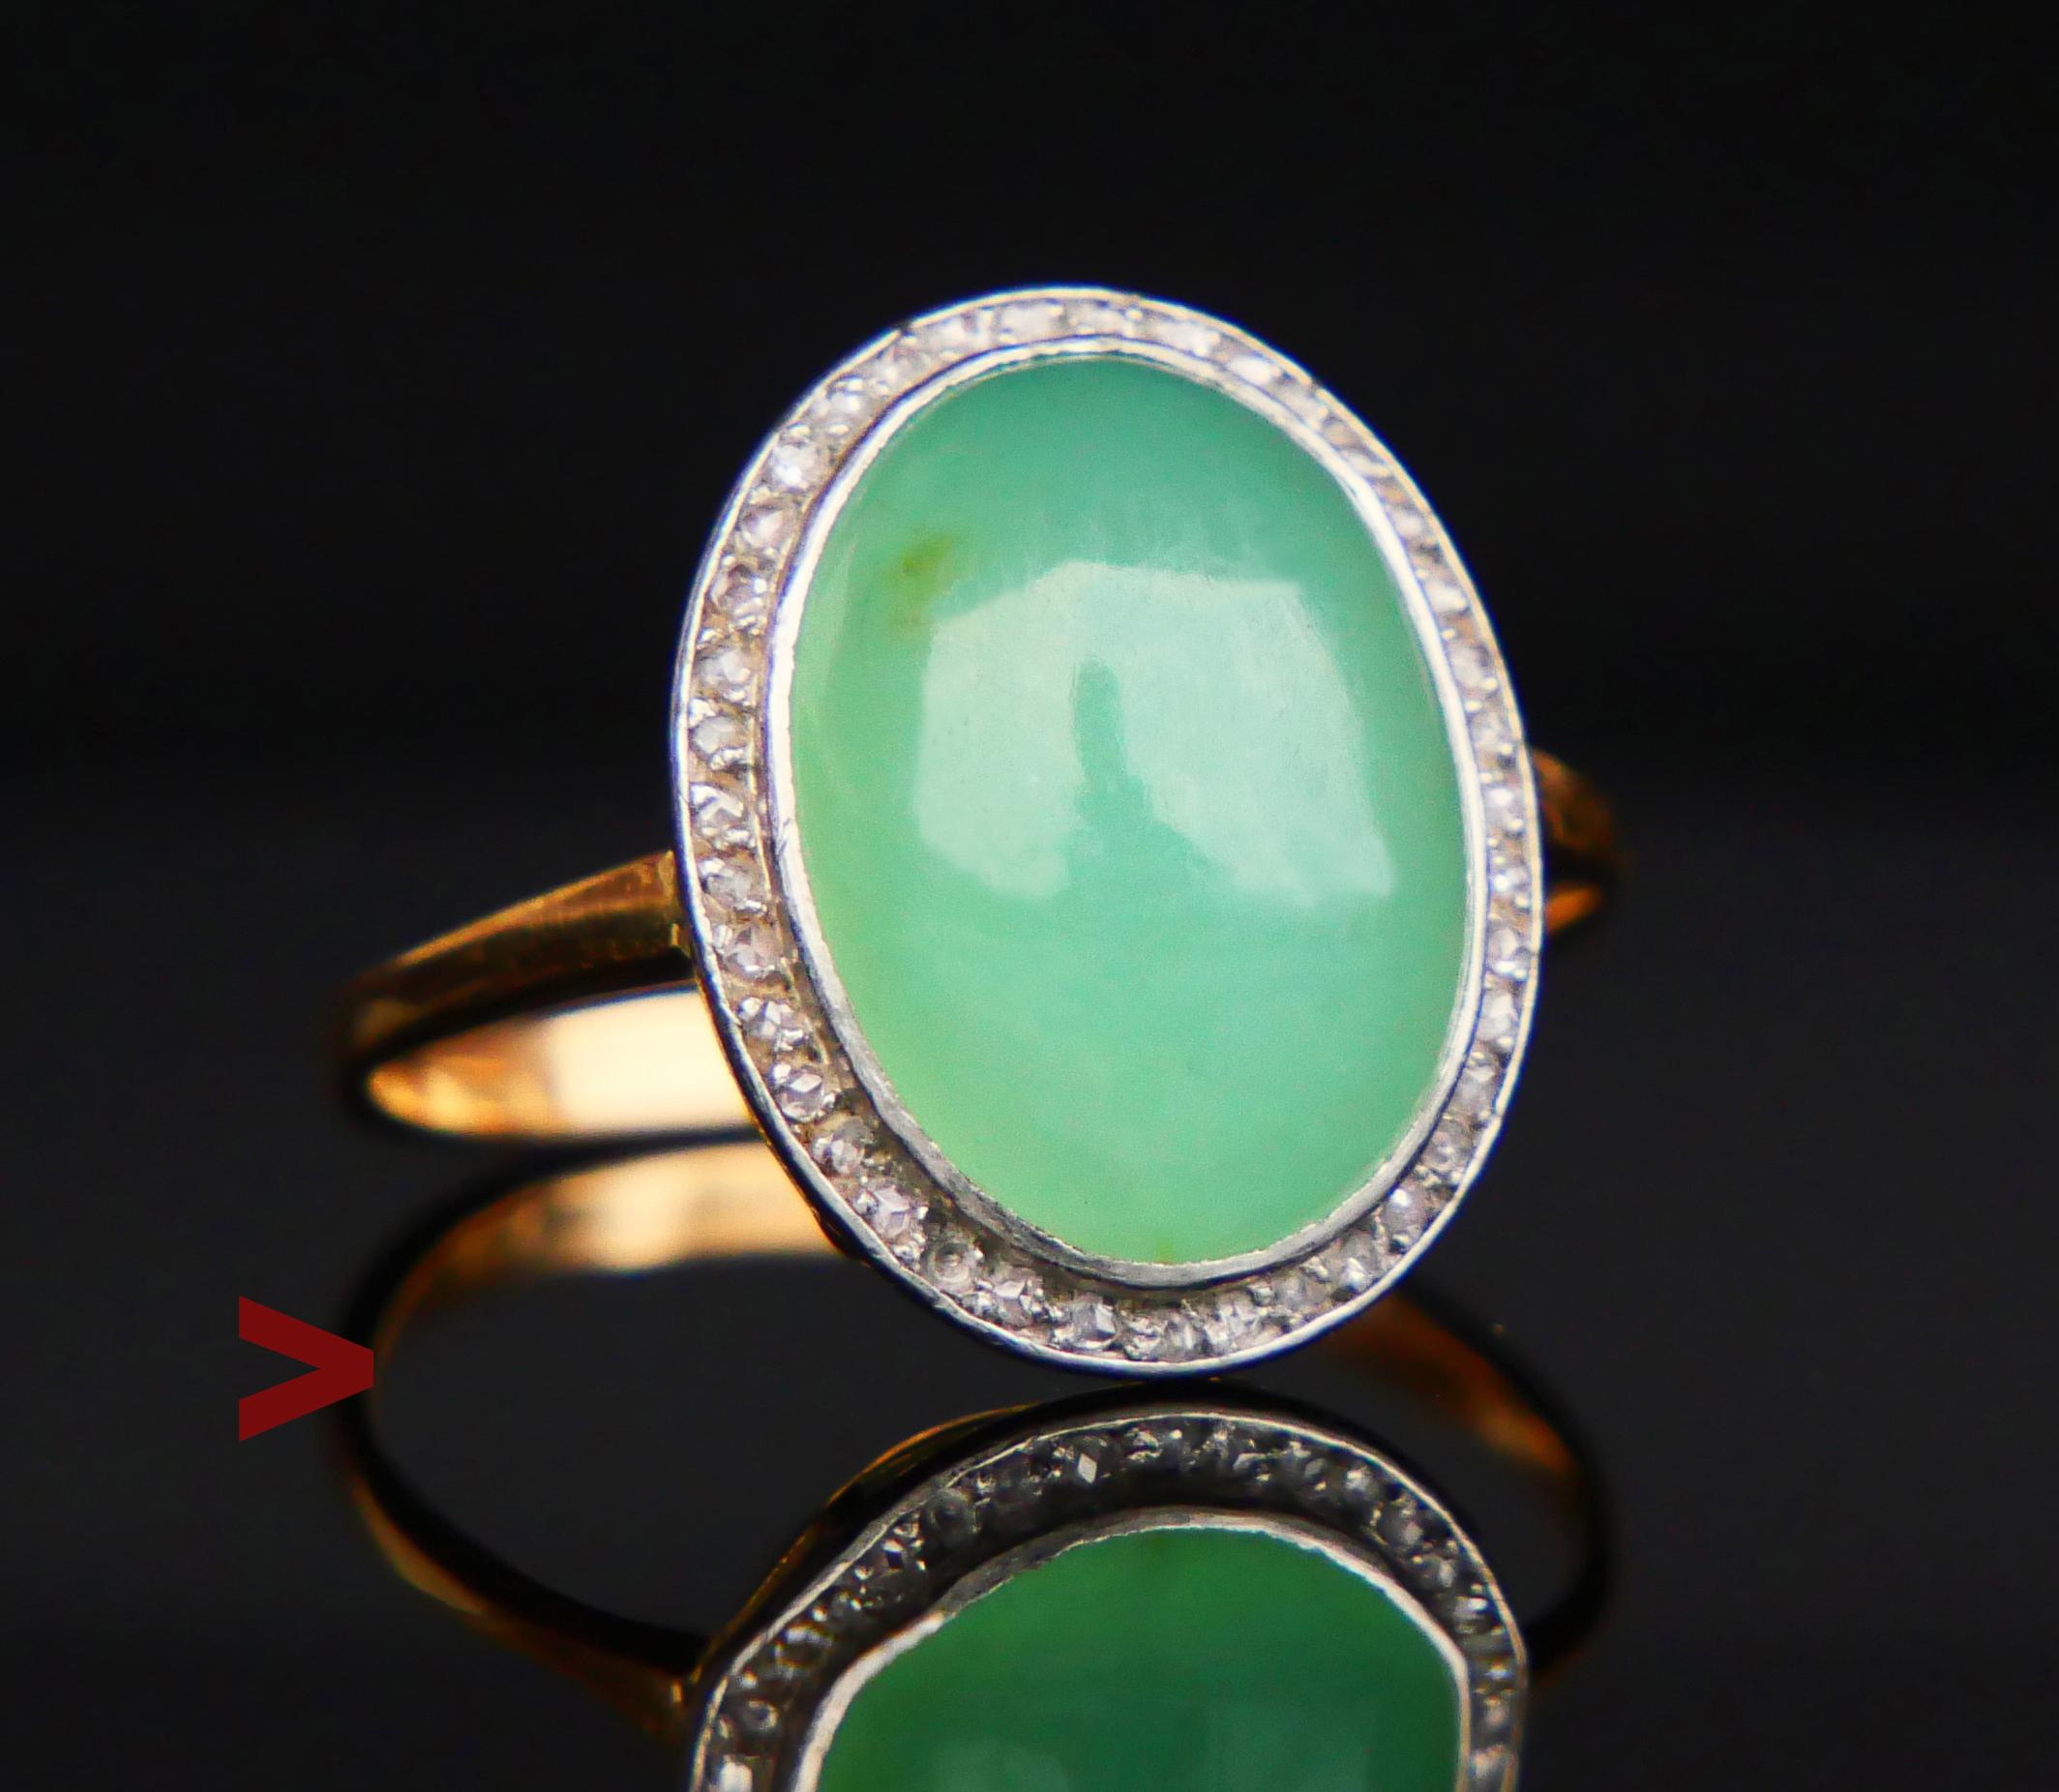 German halo-type Ring made ca. early 1930s. Solid 18K yellow Gold band with top of the crown in White Gold. Bezel set natural Green Chalcedony cabochon cut 15 mm x 12 mm x 6 mm deep/ ca 10 ct. This stone shows minor natural inclusions. Forty paves